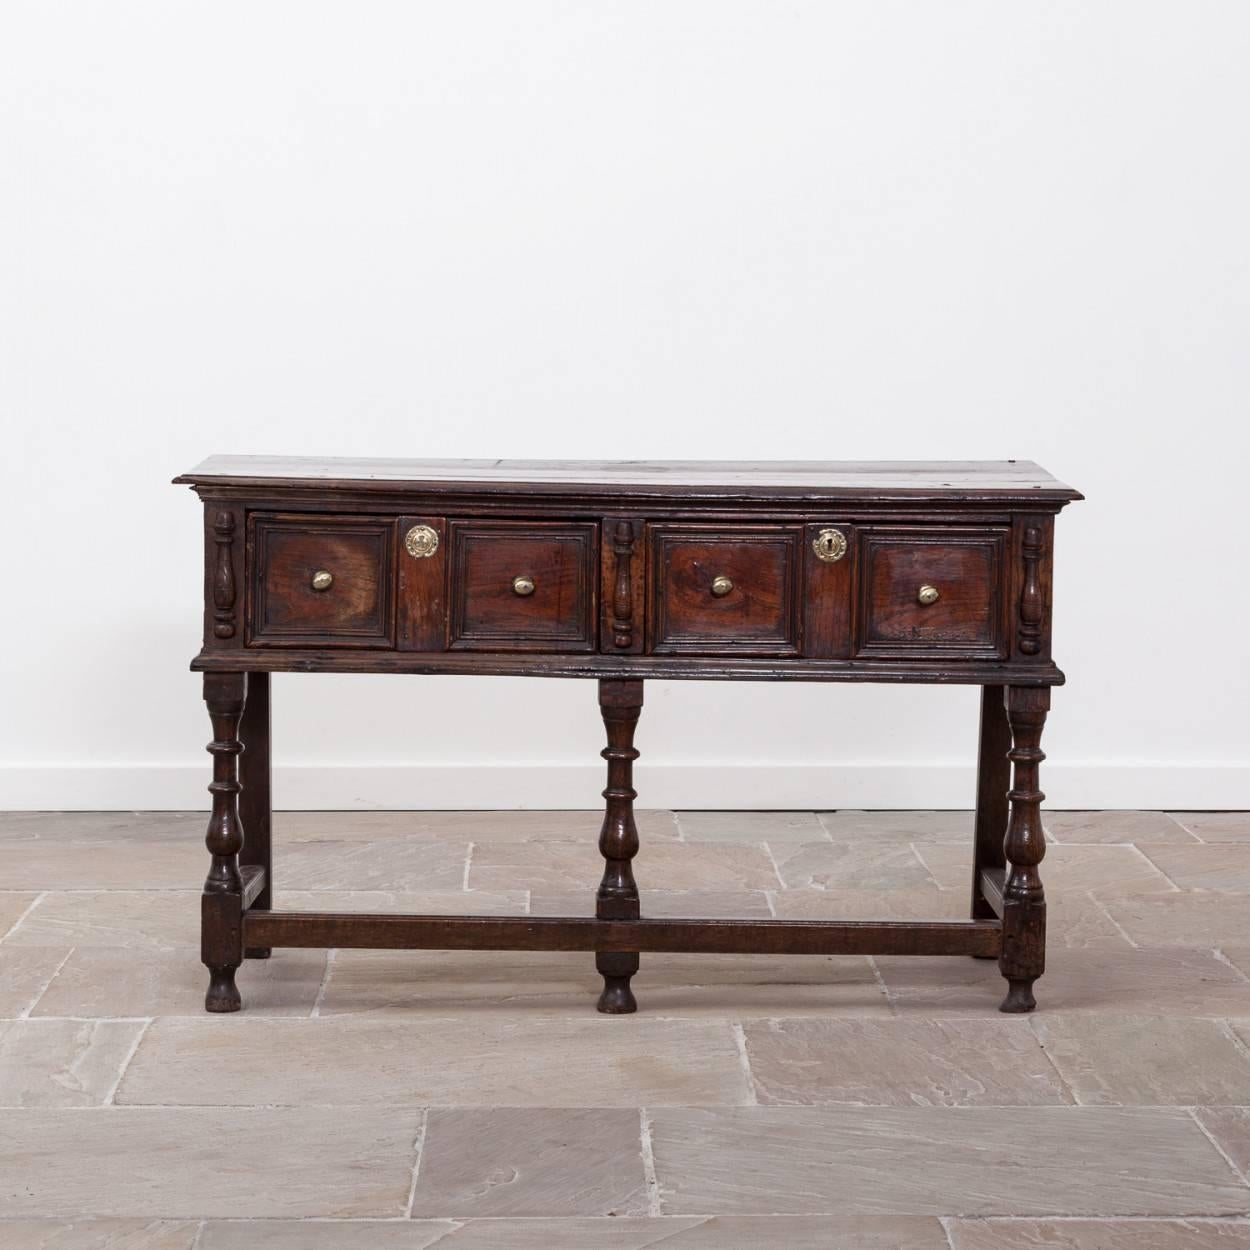 Superb 17th century Jacobean (1603-1625) oak dresser base.

This is a rare example, it is a fabulous small size which makes it a very useful and useable piece.

The stretchers appear to have probably been added at a later date.

Measure: 80cm high,